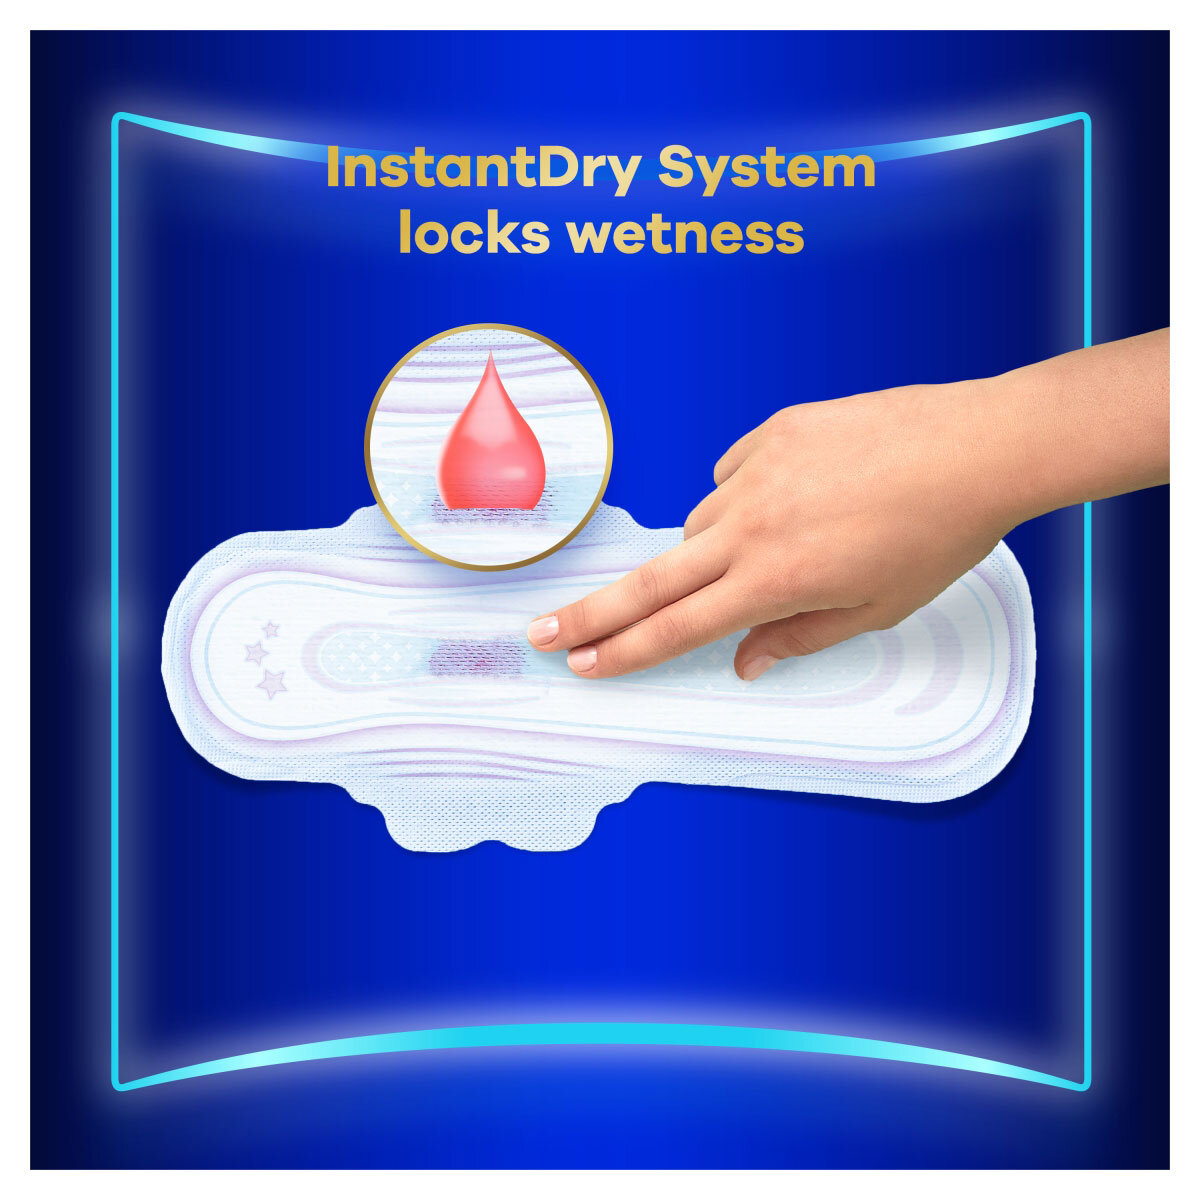 Instant dry system